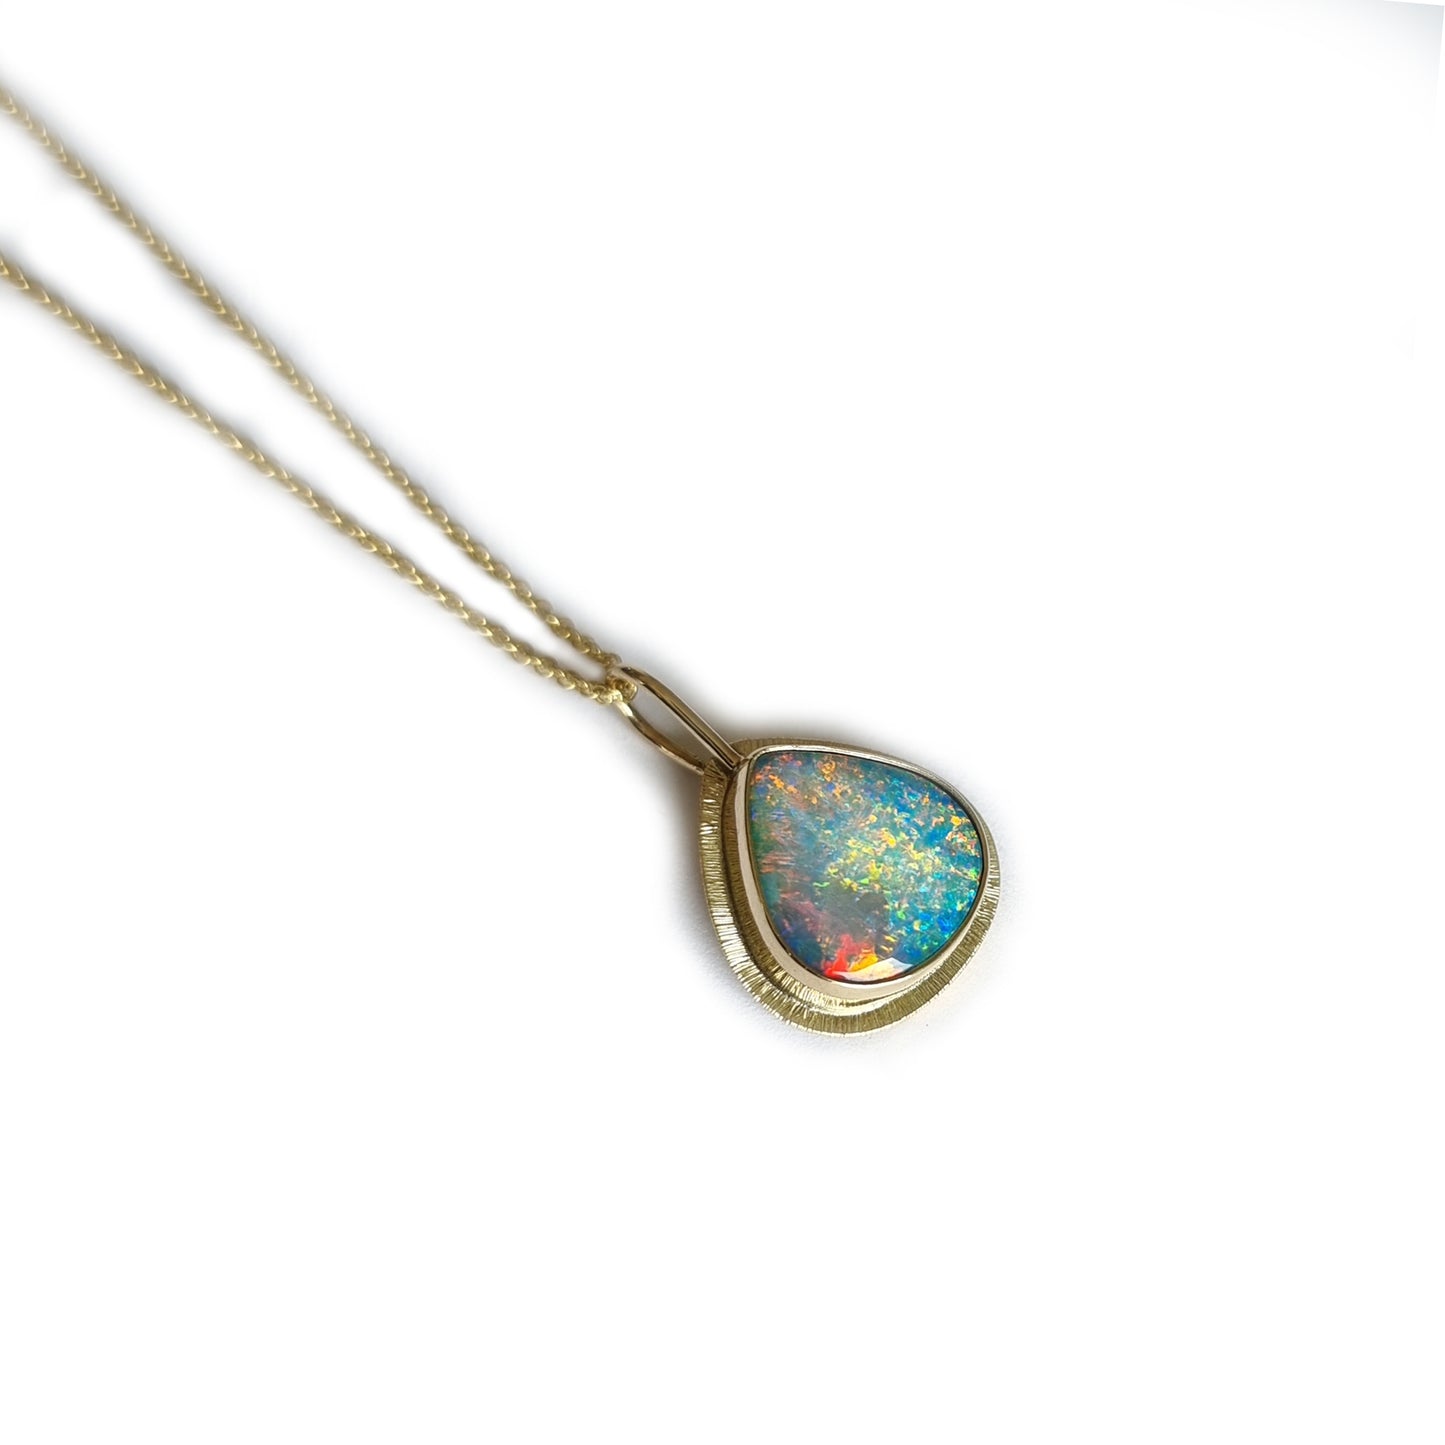 Emily Eliza Arlotte Handcrafted Fine Jewellery - Handmade 9 ct Gold Large Teardrop Opal Doublet Coober Pedy South Australia Orange Blue Green Purple Flashes 14ct Sold Gold Chain Contemporary Design Made in Tasmania 